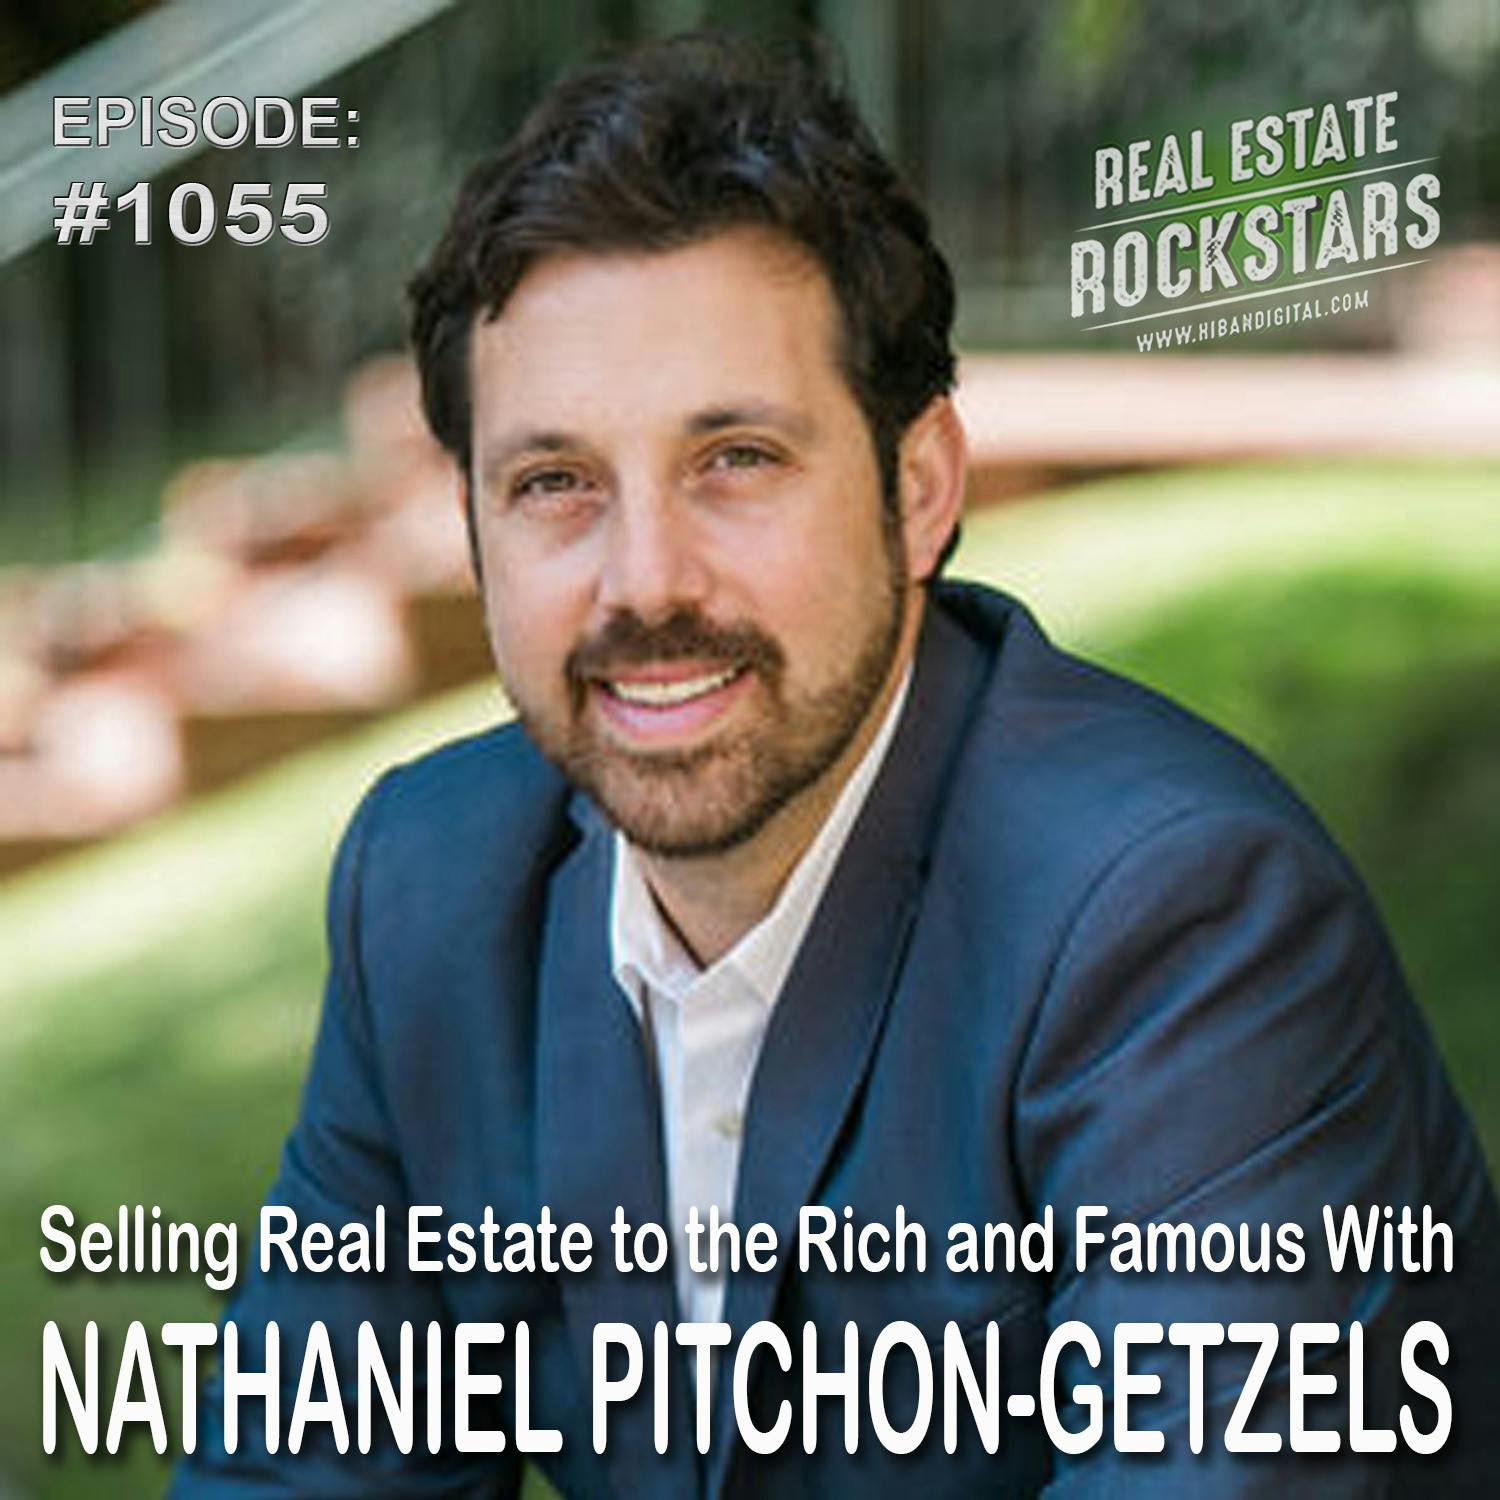 1055: Selling Real Estate to the Rich and Famous With Nathaniel Pitchon-Getzels